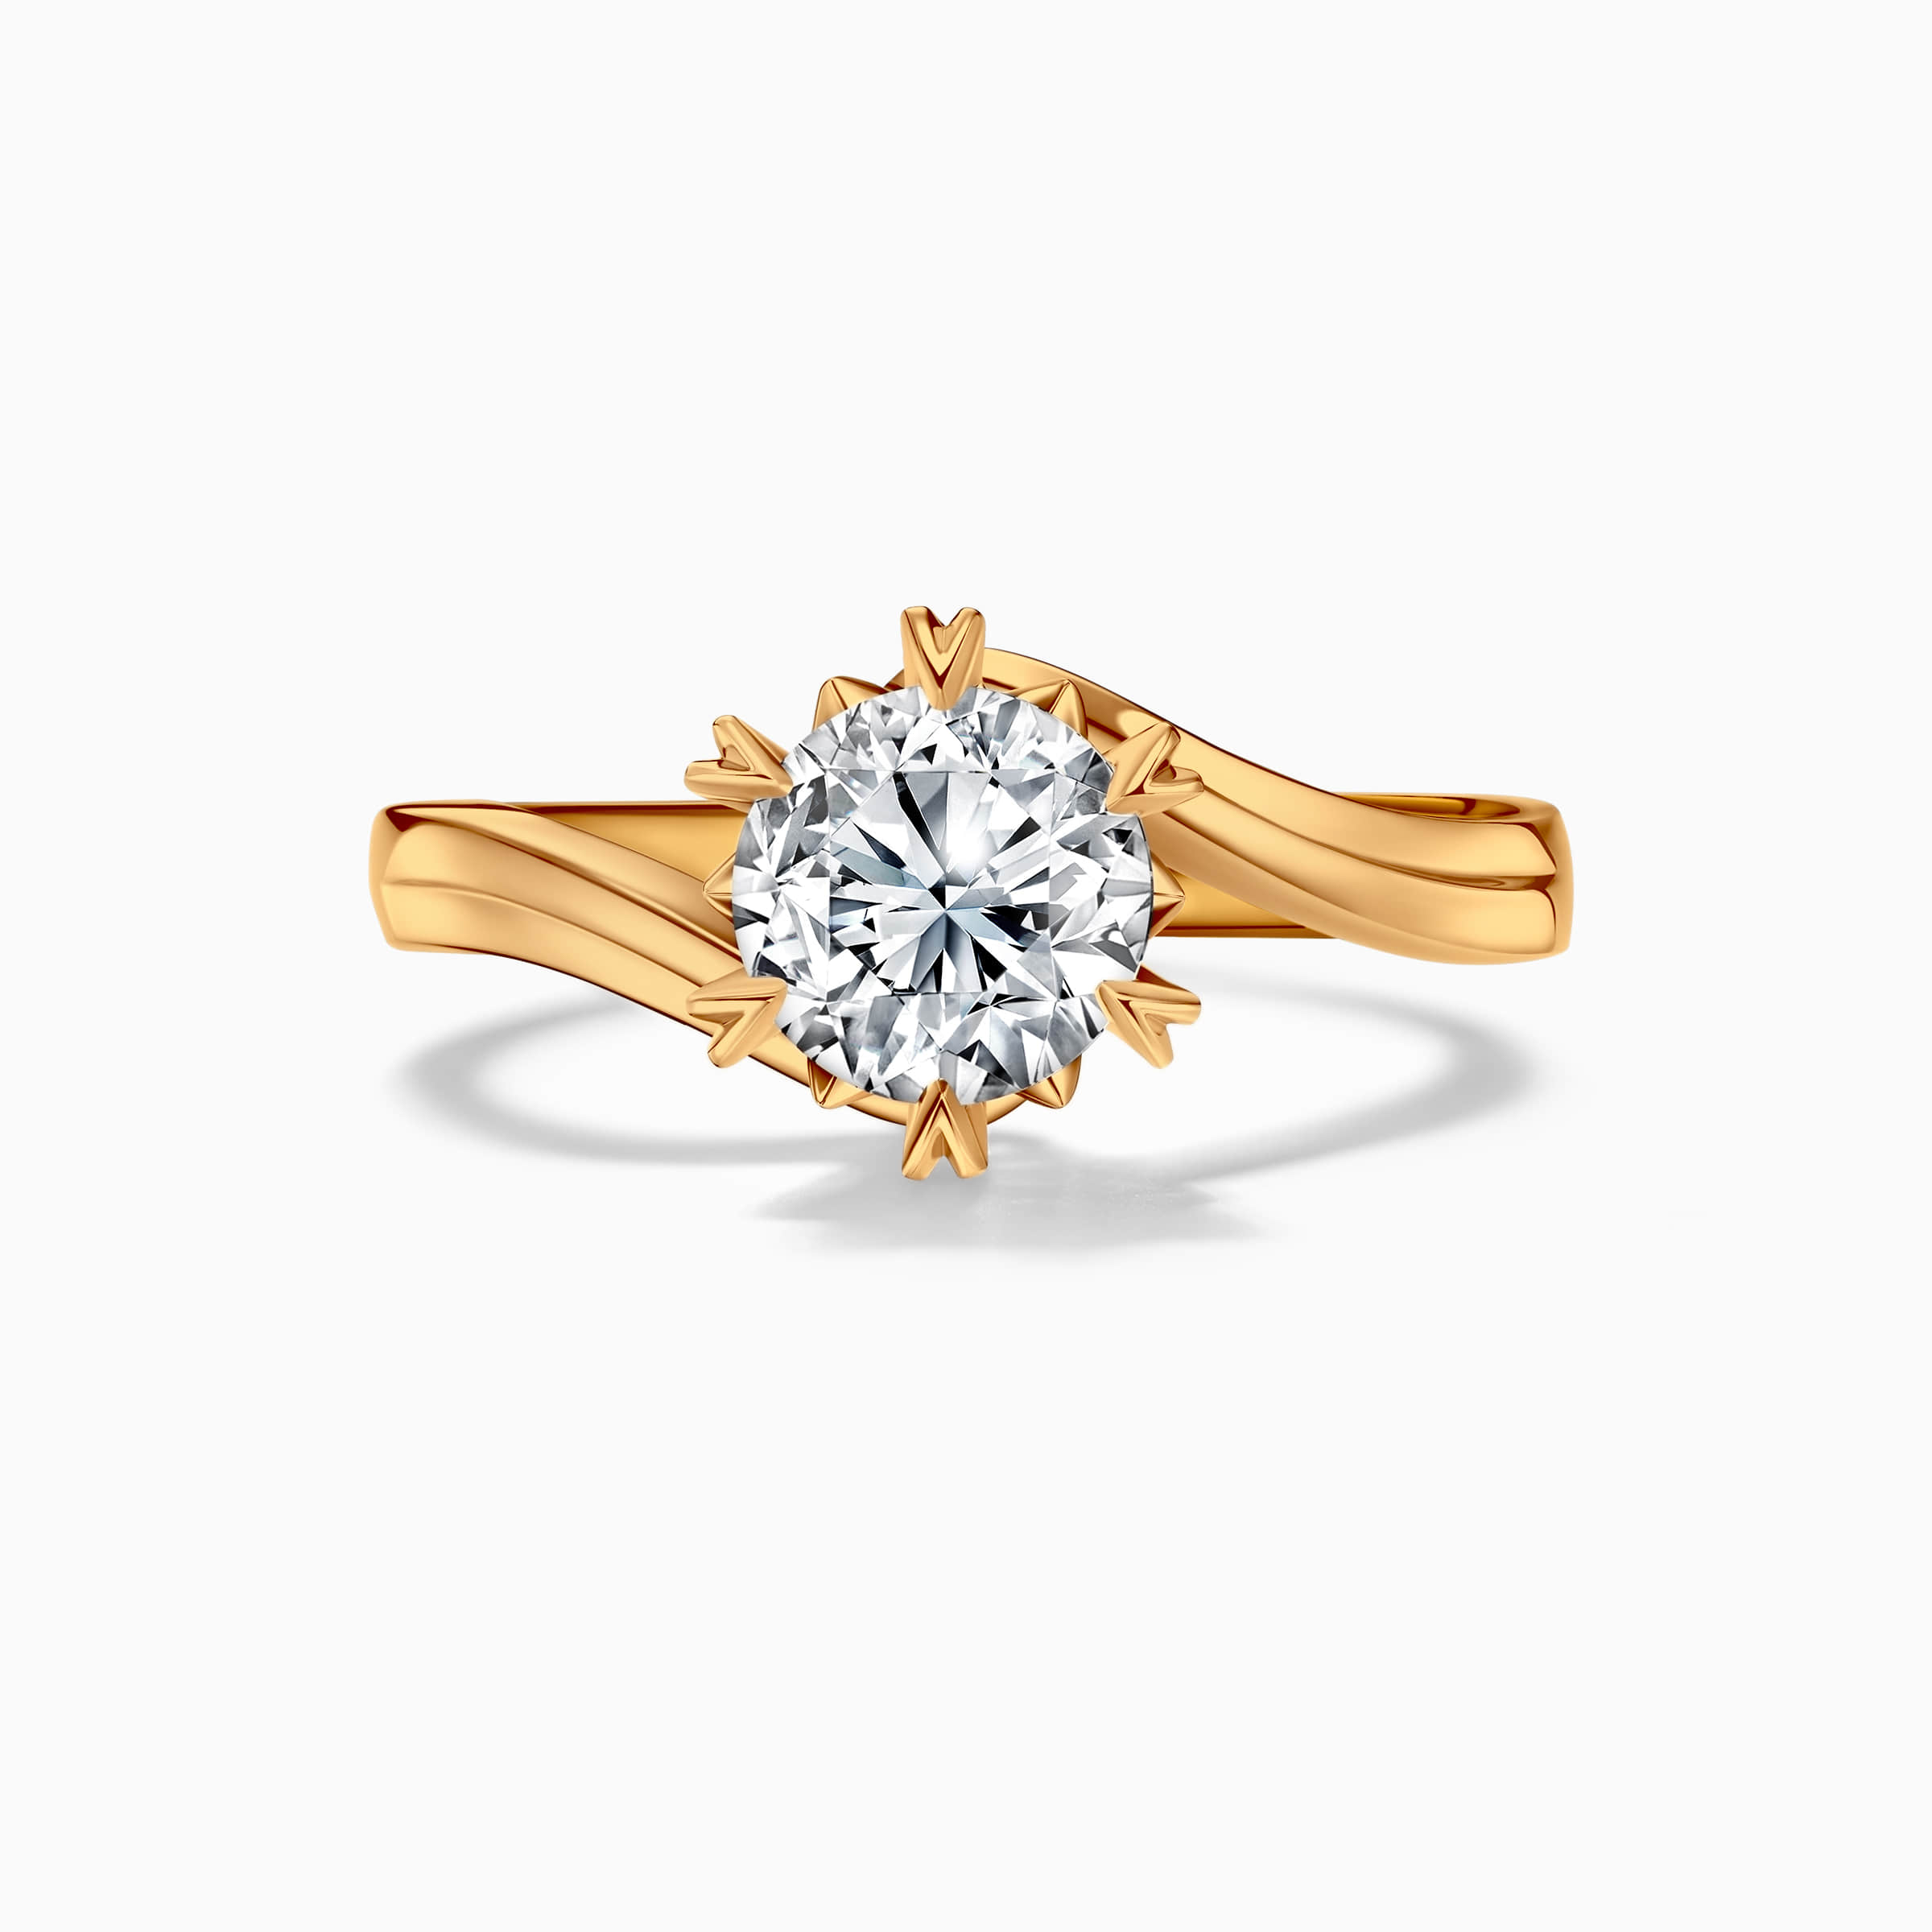 Darry Ring snowflake bypass promise ring yellow gold